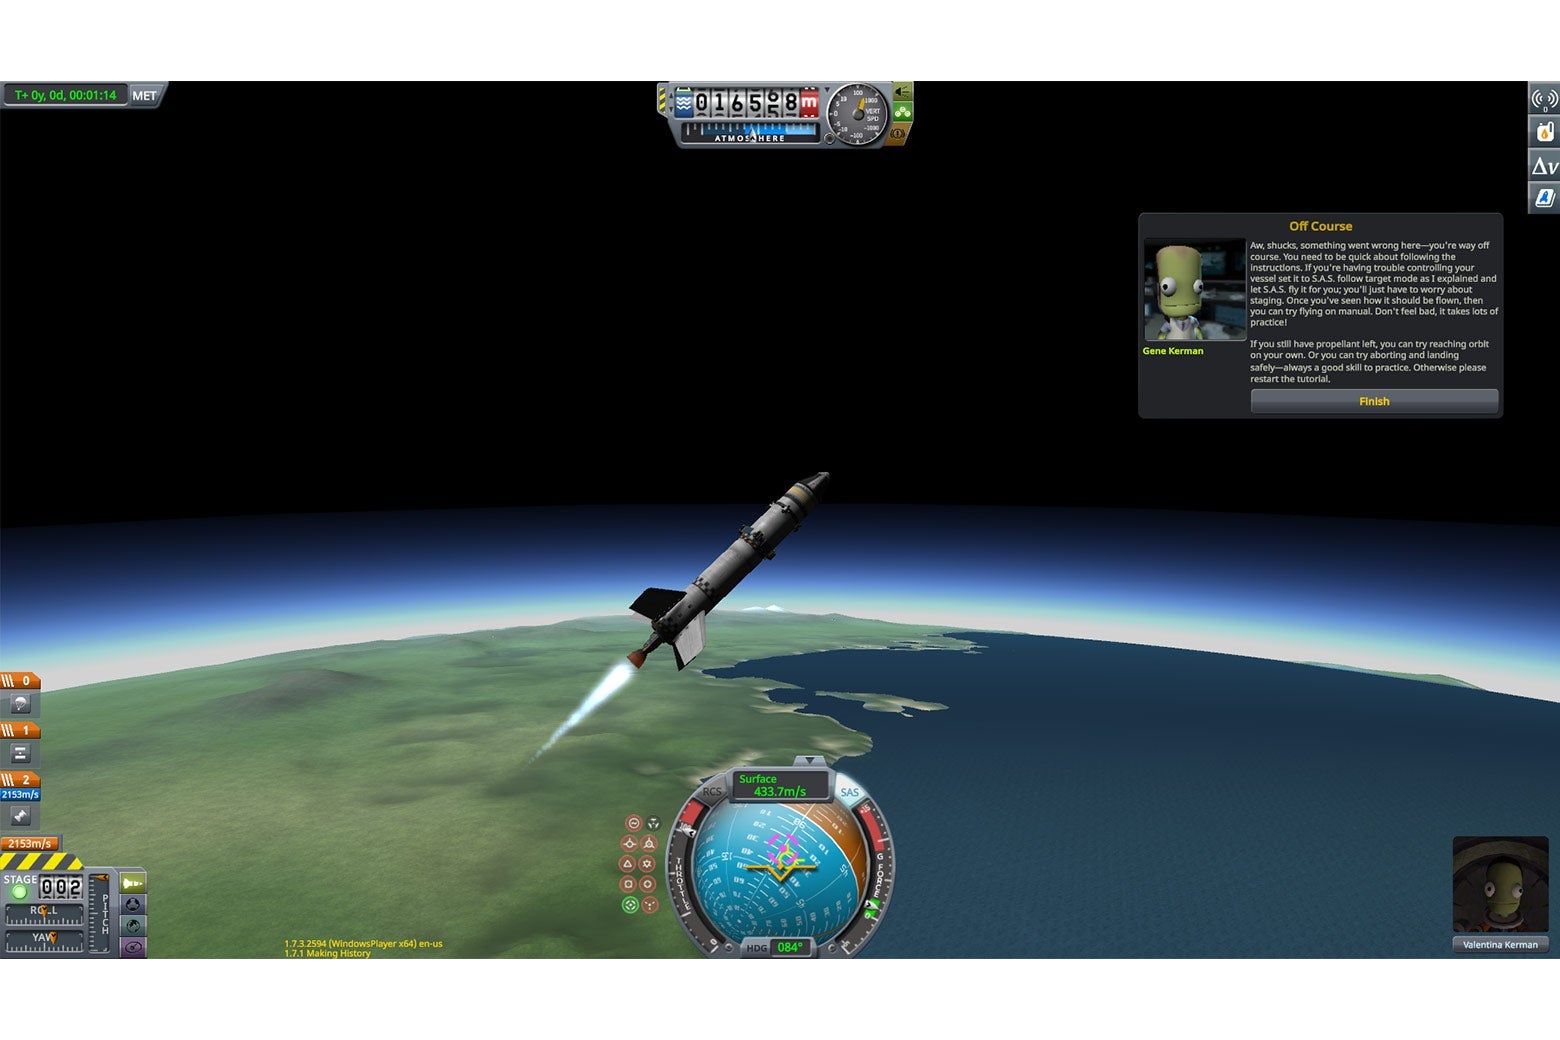 Baby’s Second Munar, now with wings, is about 16,000m in the air when the tutorial says the ship has gone off-course.